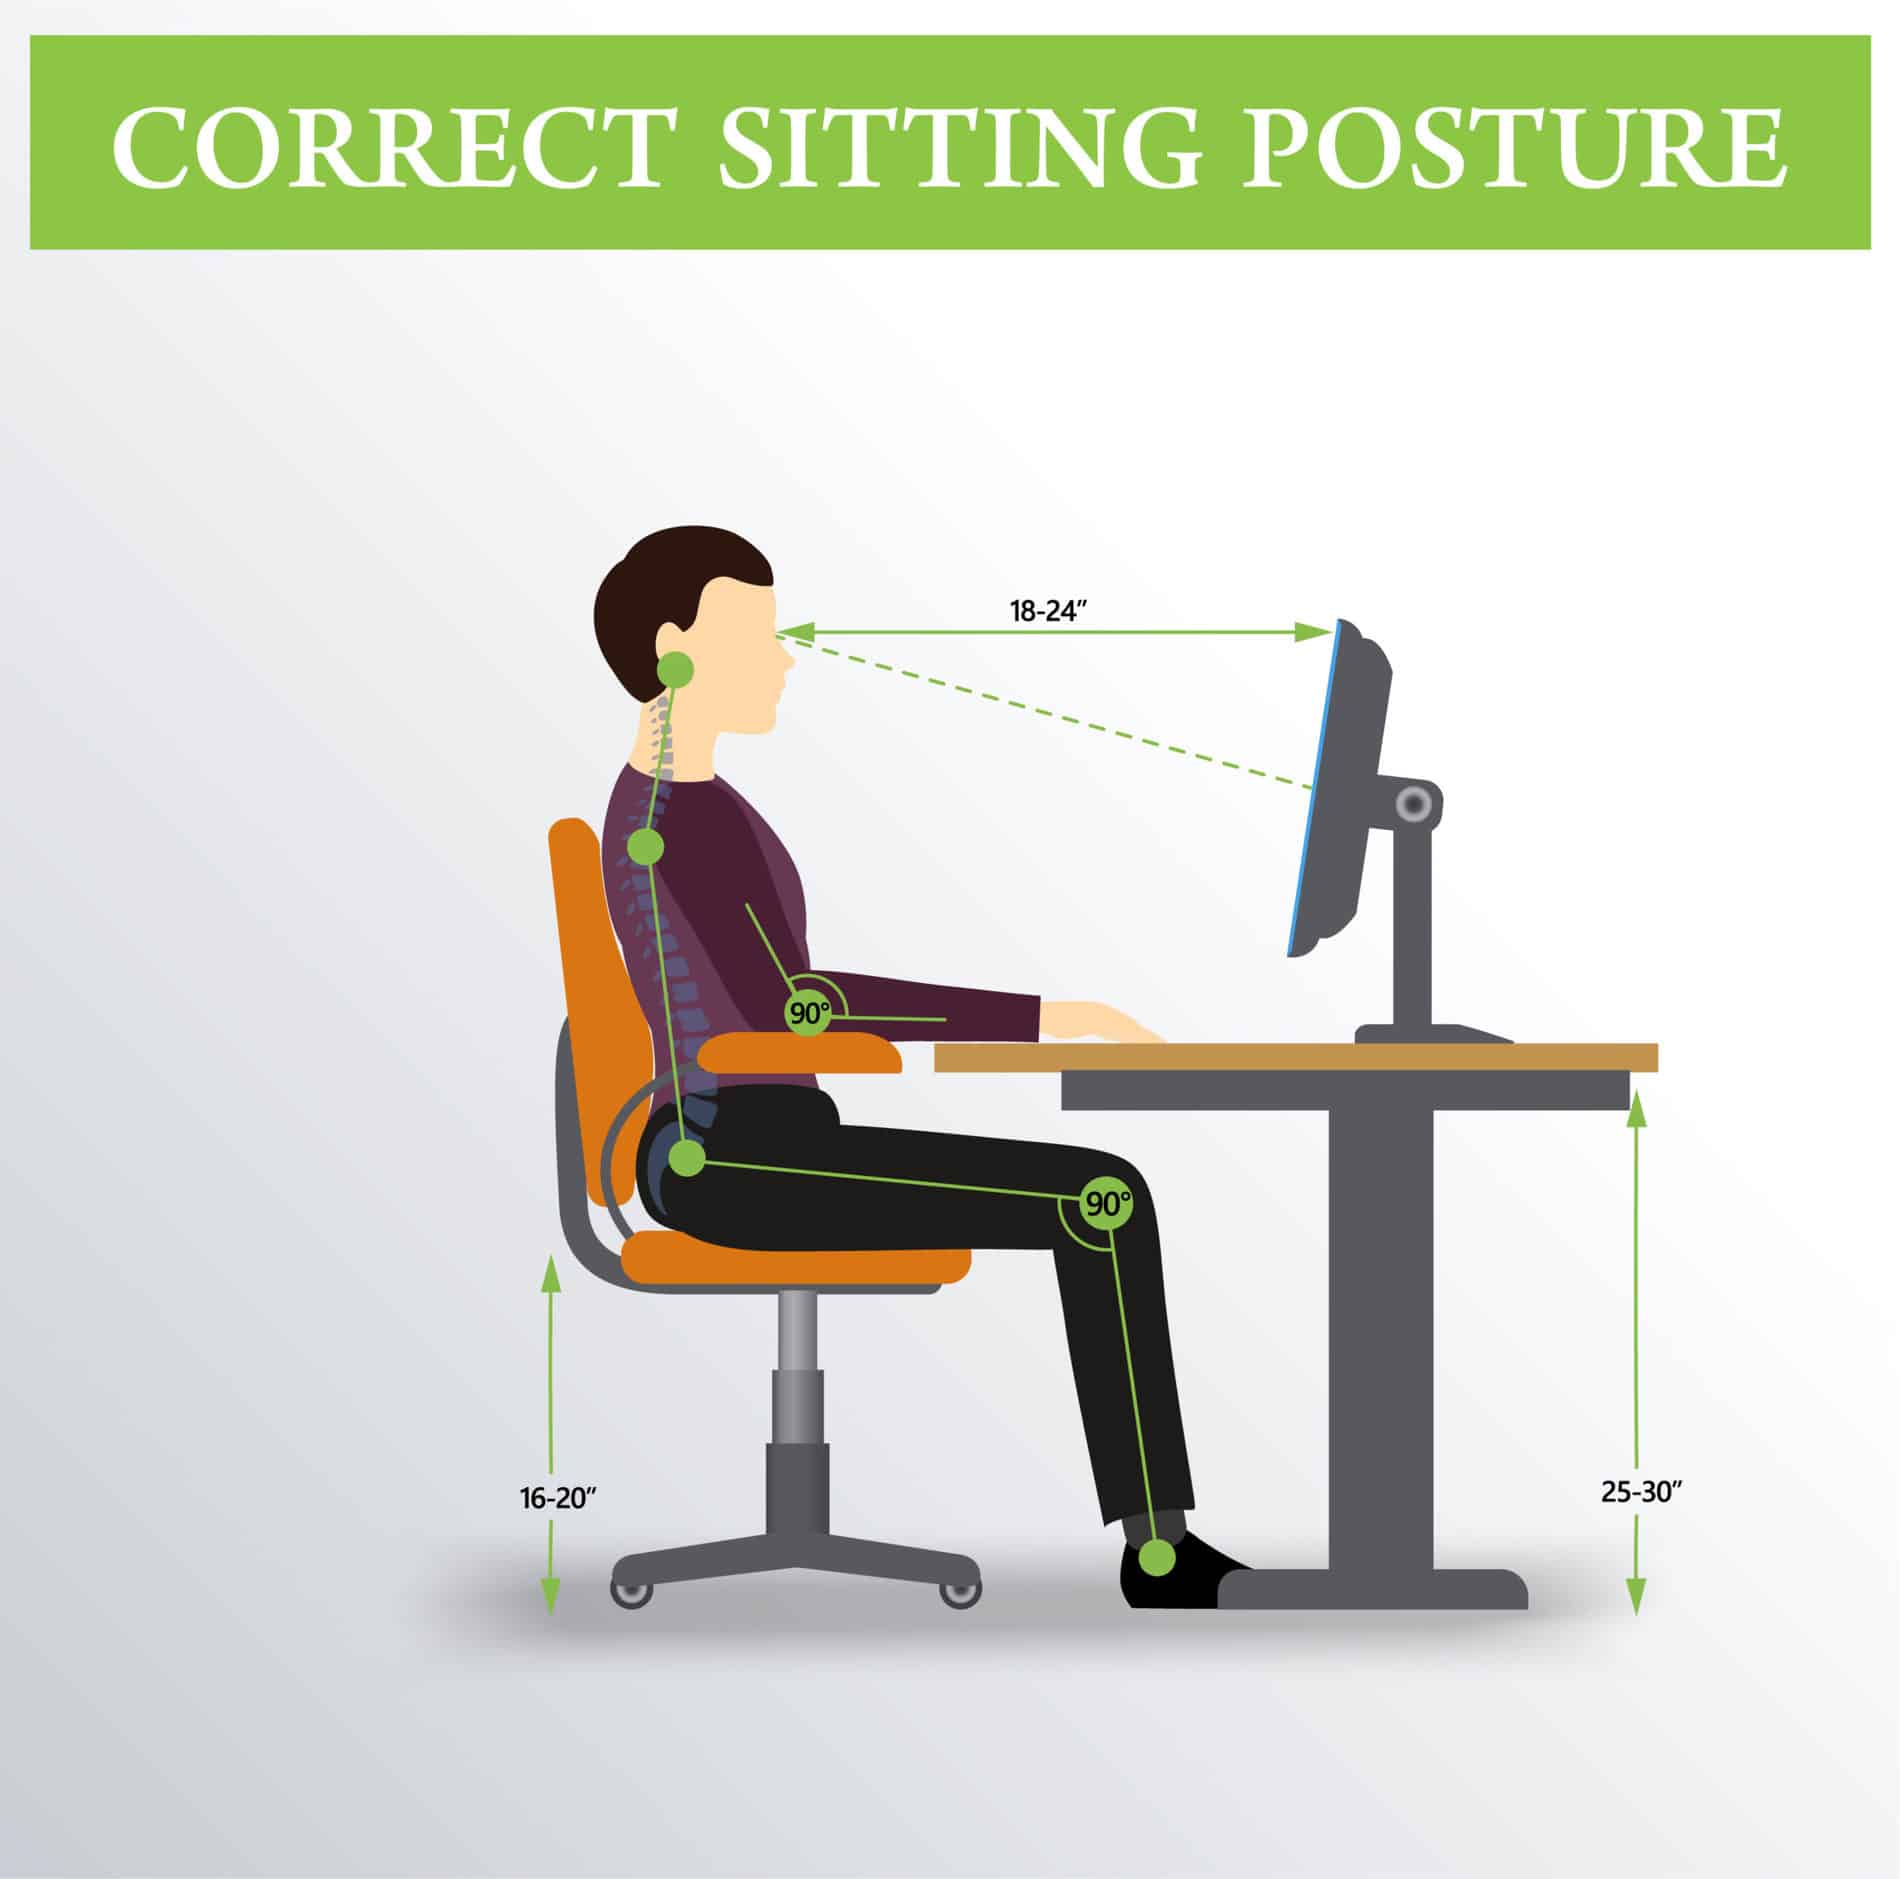 Upper Cross Syndrome Correct Posture